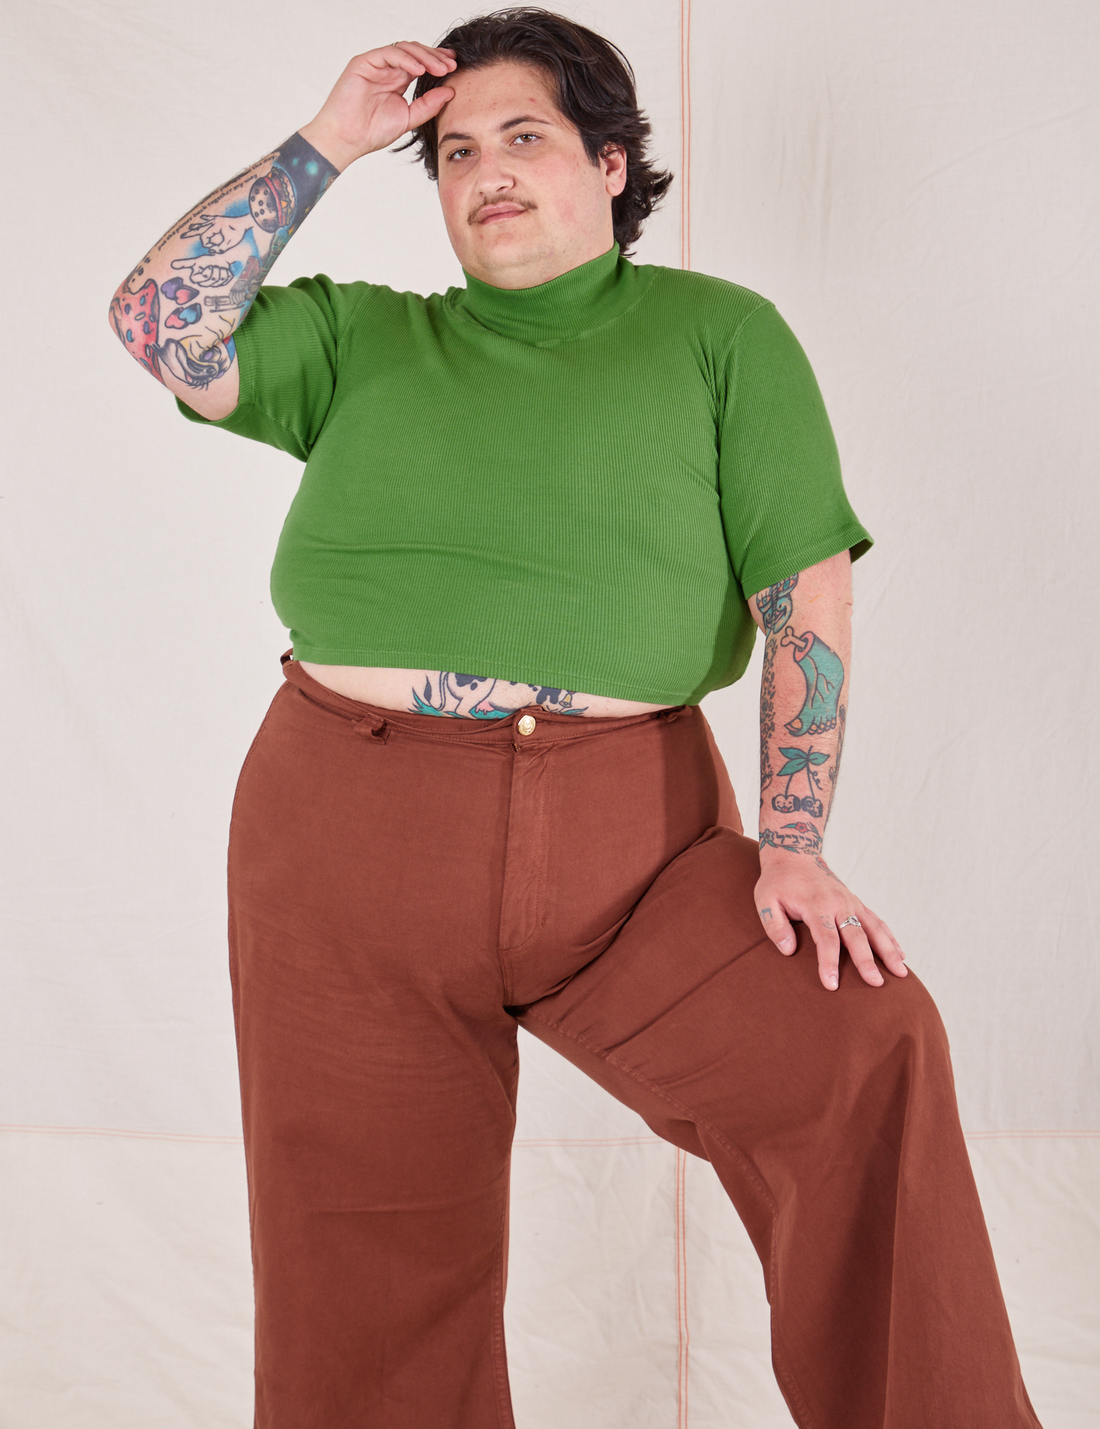 Sam is wearing 1/2 Sleeve Essential Turtleneck in Bright Olive and fudgesicle brown Bell Bottoms